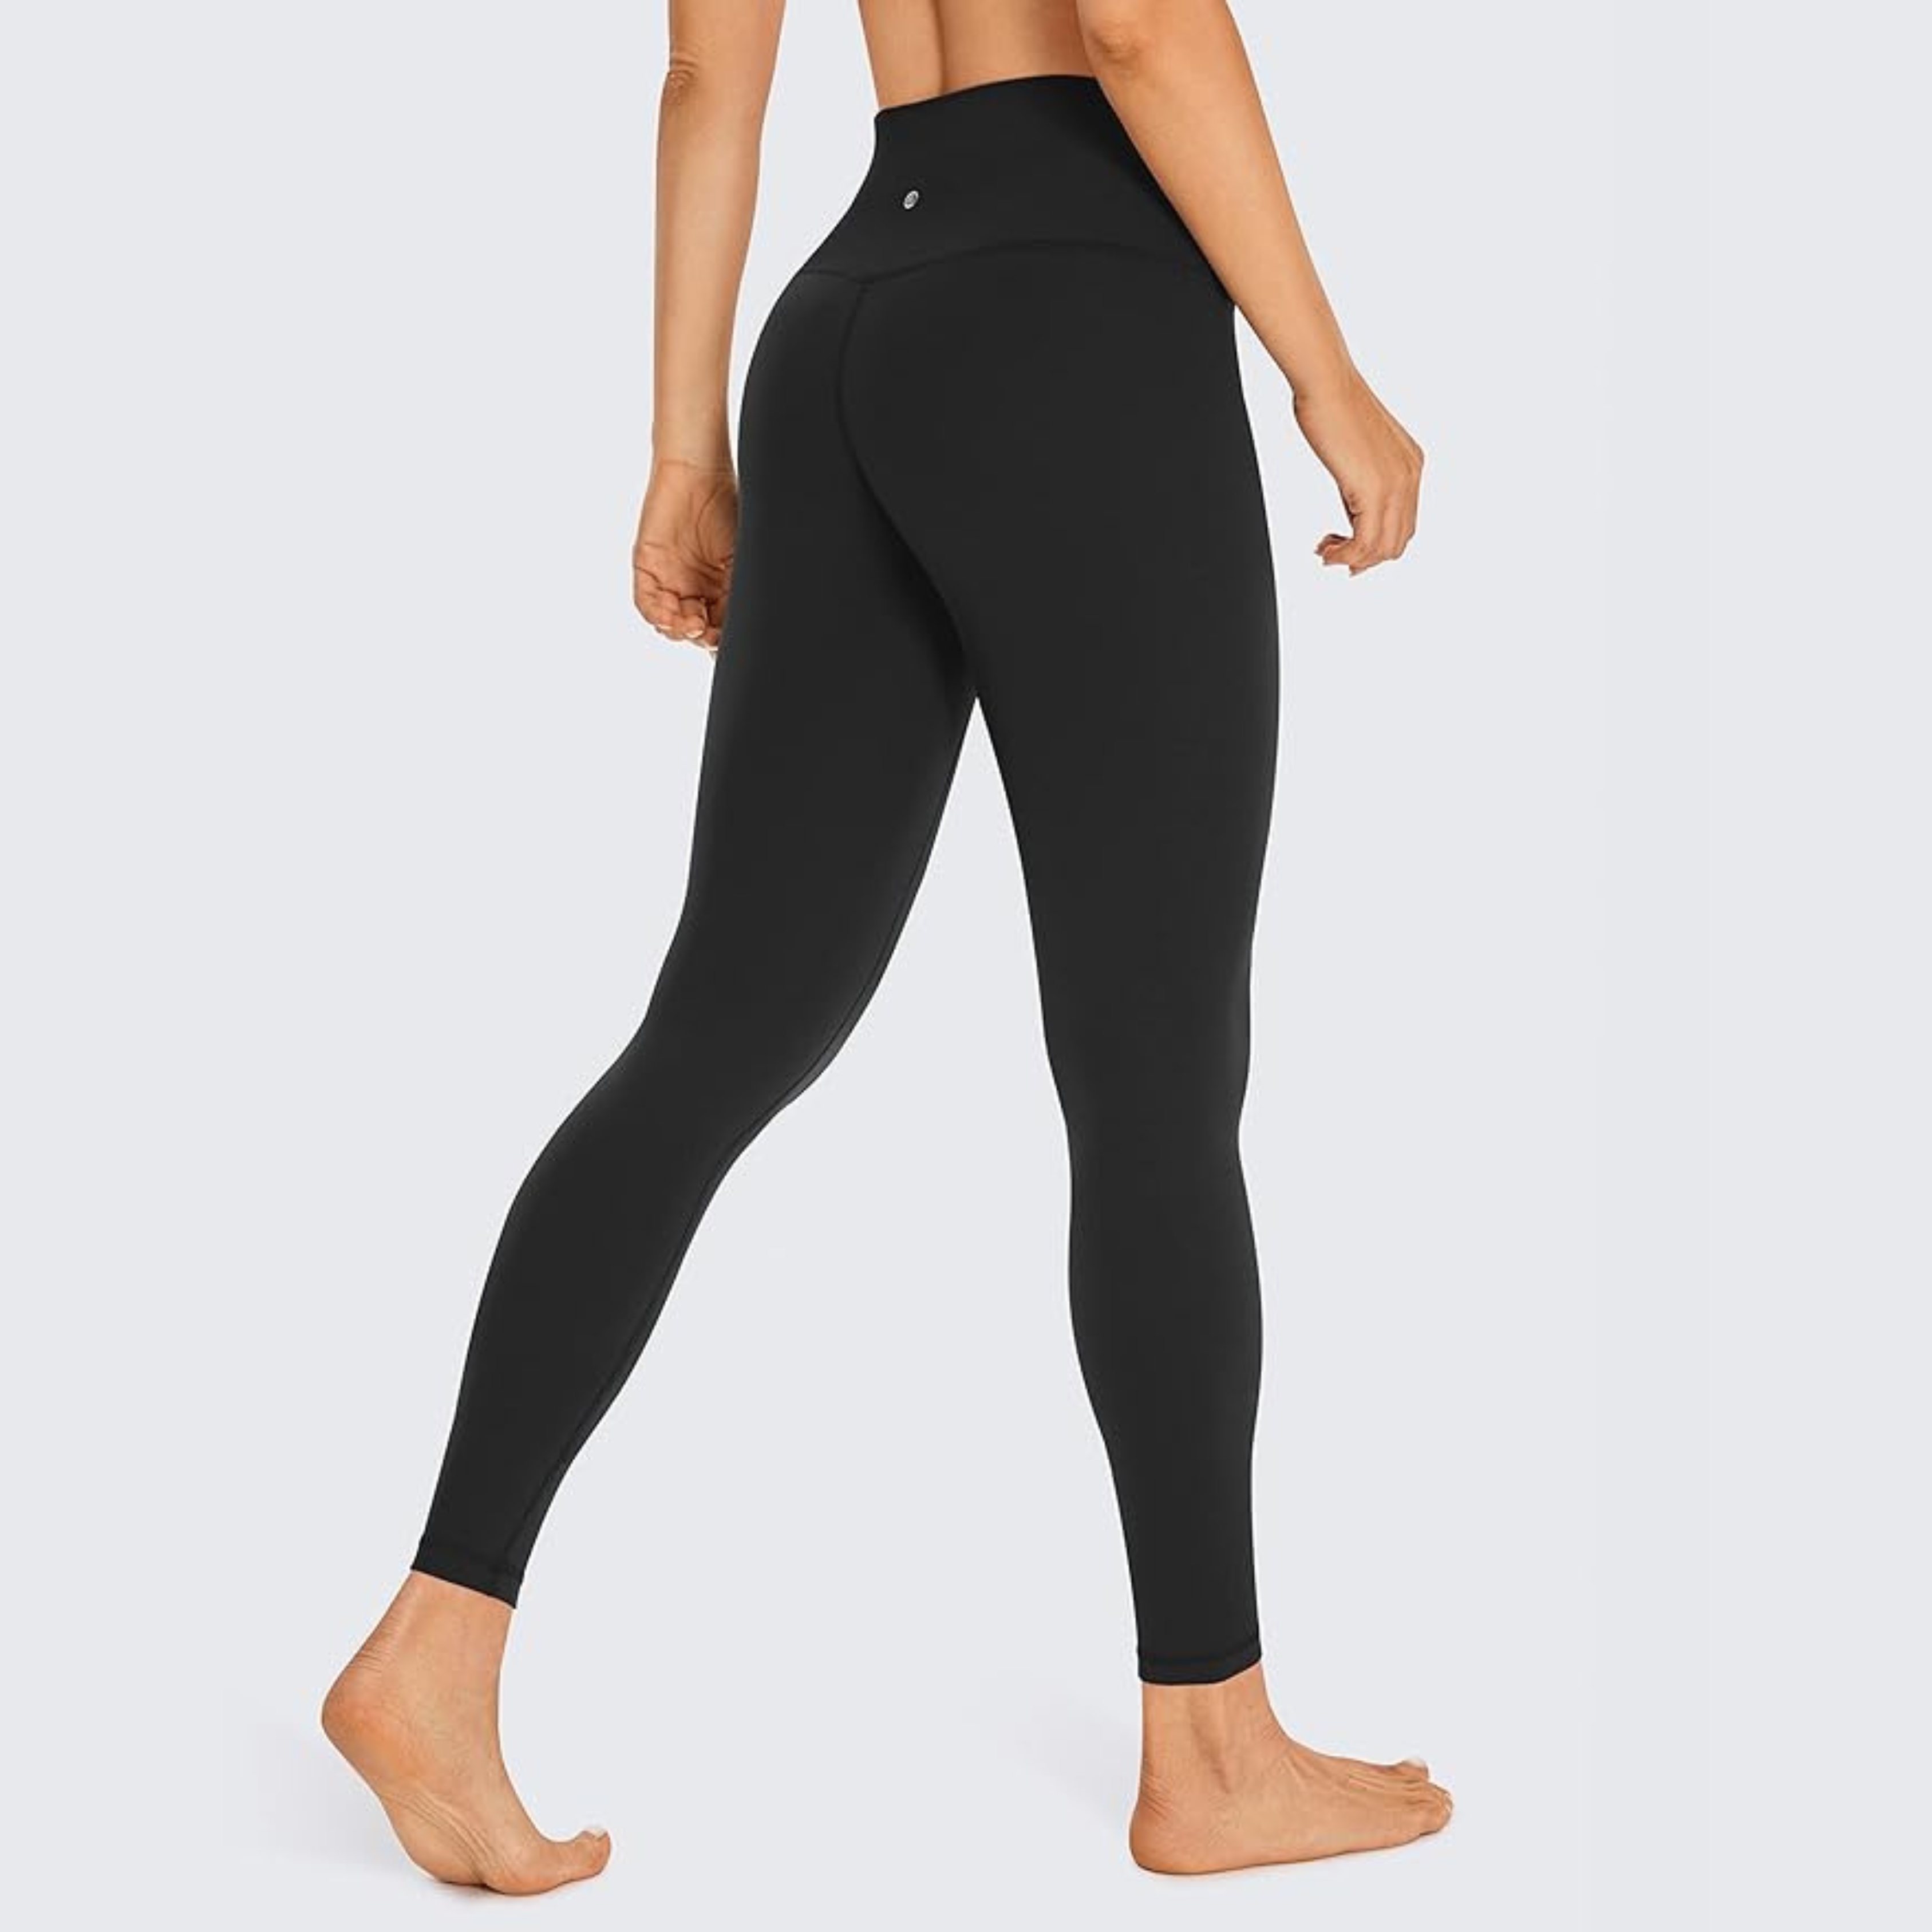 Cheap yoga leggings: 's top-rated $26 leggings have spiked